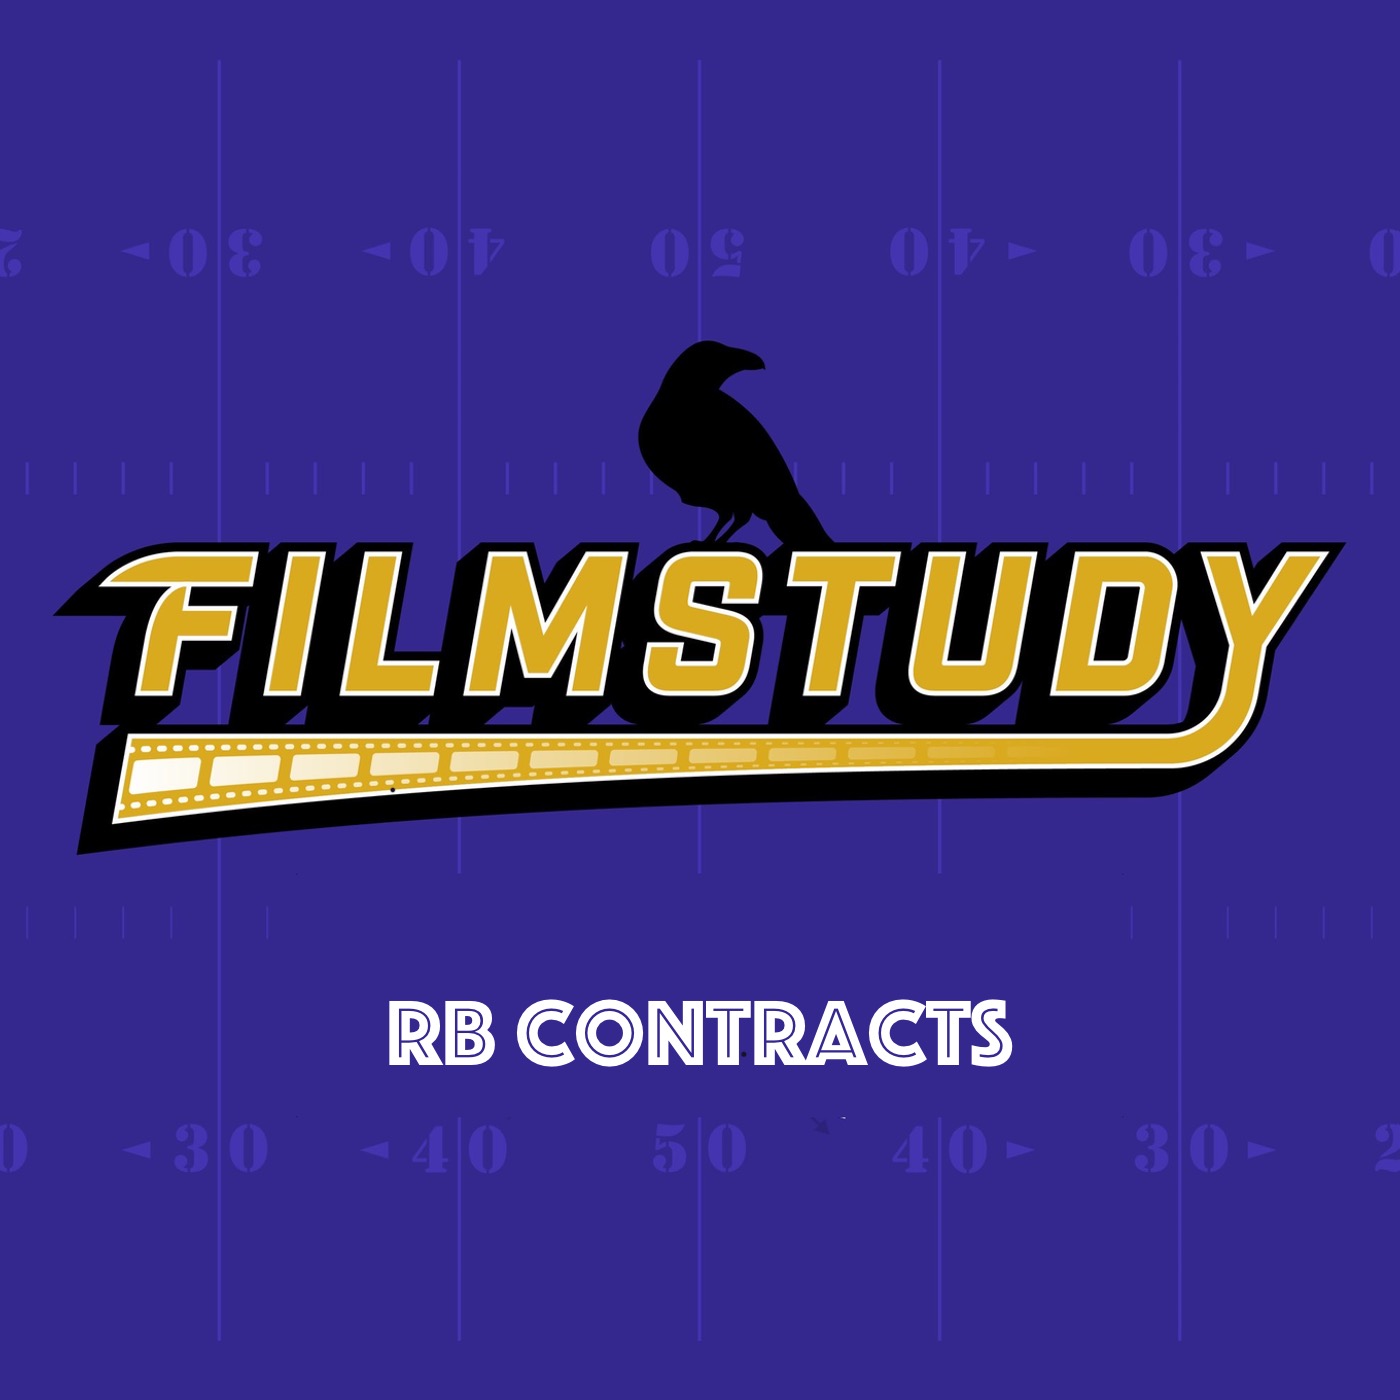 RB Contracts